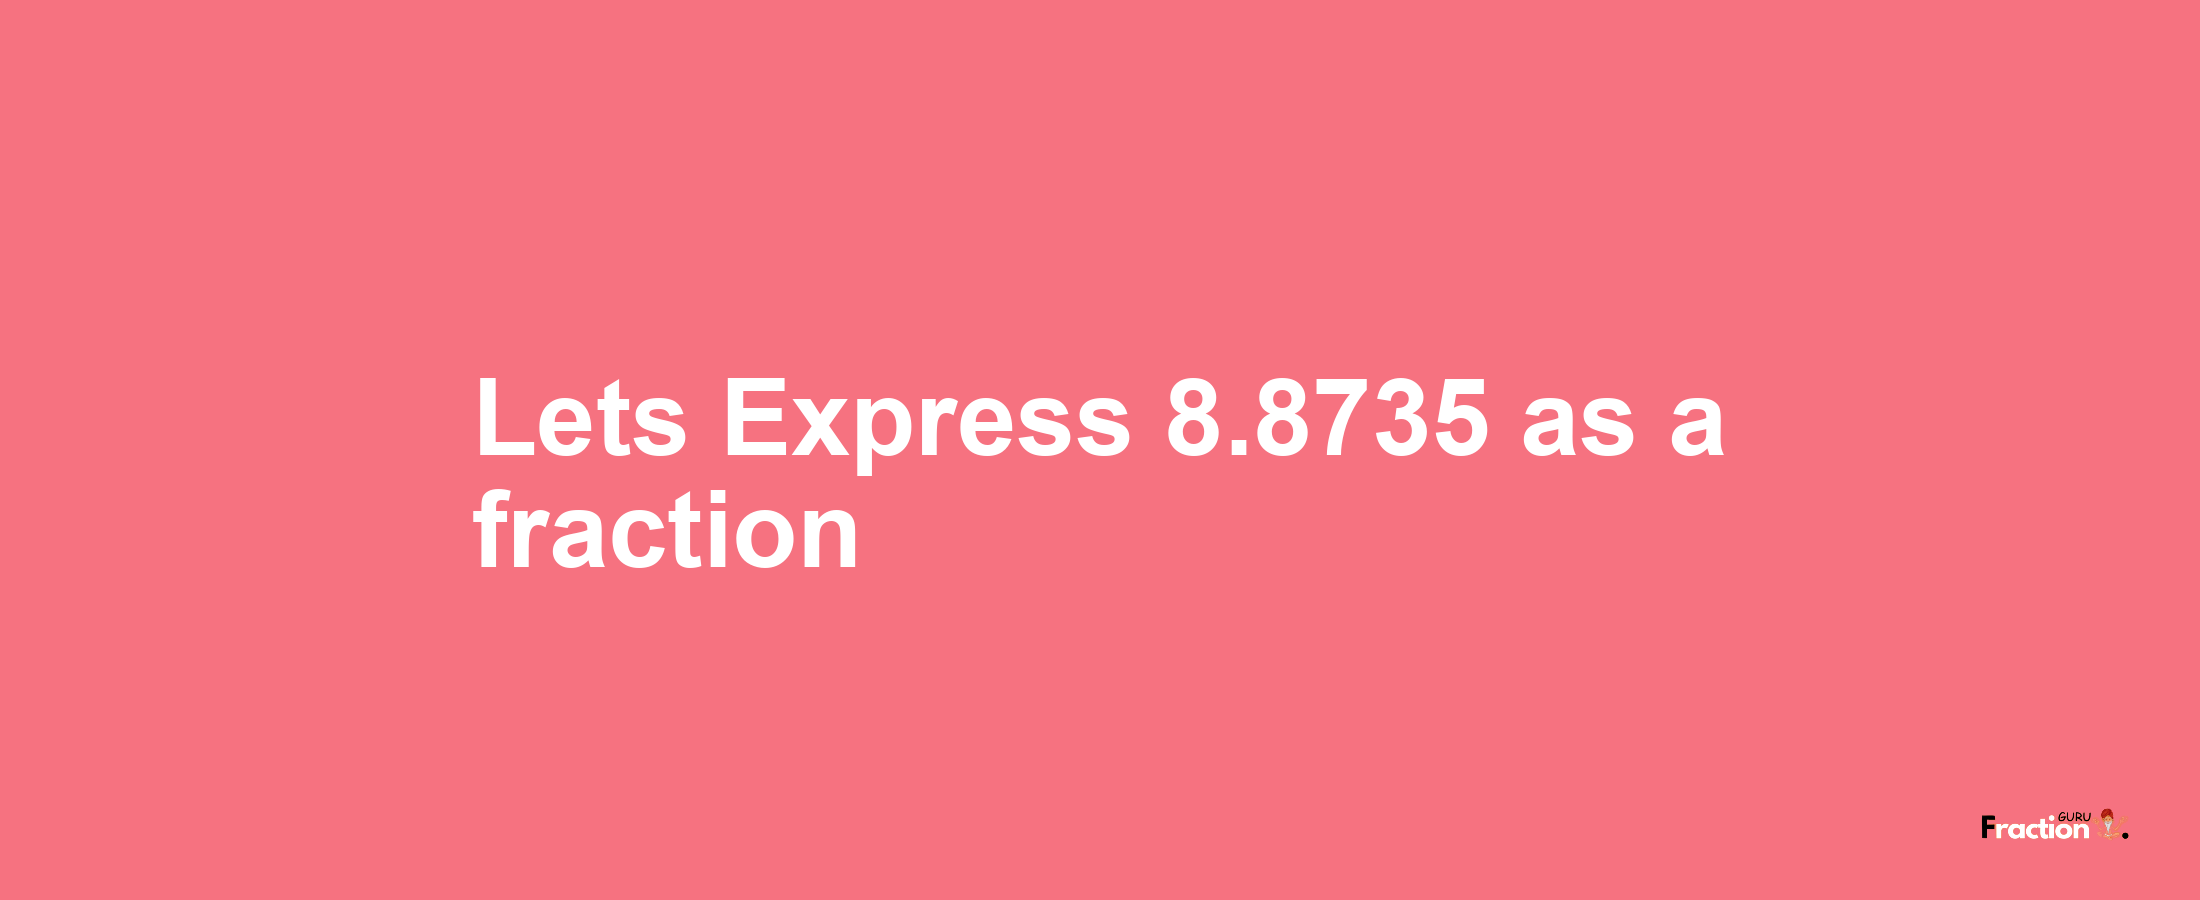 Lets Express 8.8735 as afraction